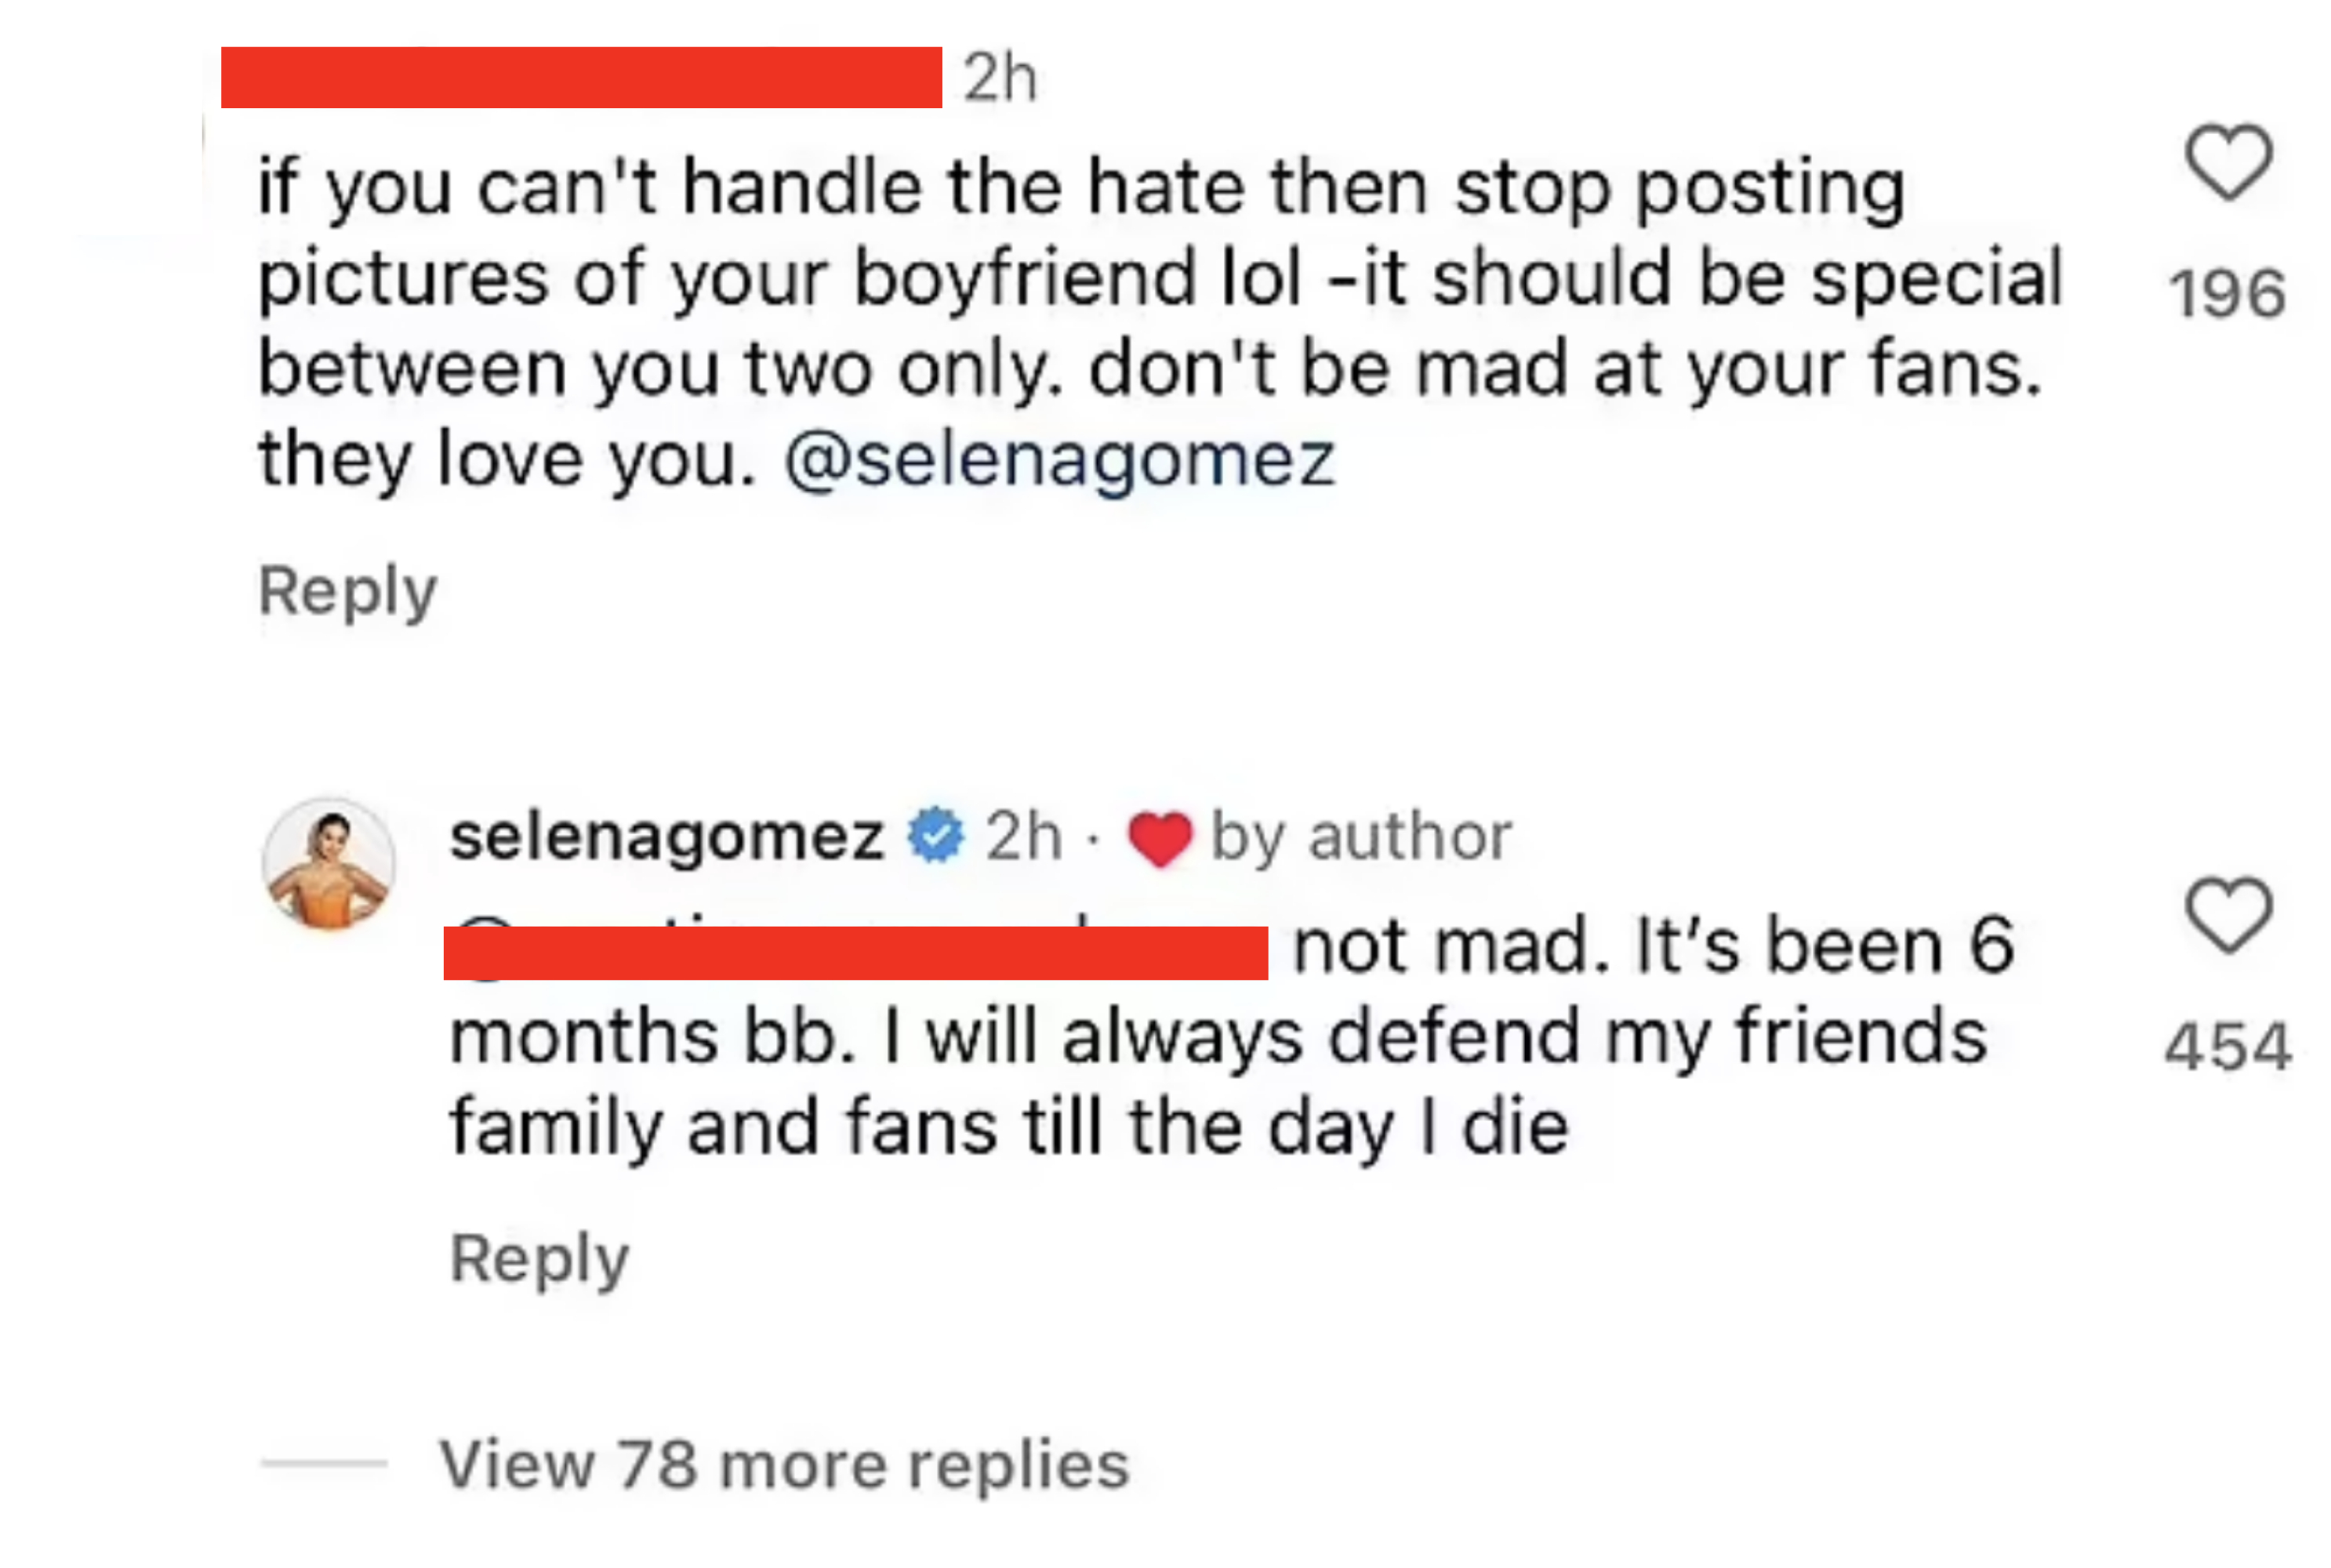 Comment reading &quot;if you can&#x27;t handle the hate then stop posting pictures of your boyfriend&quot; and &quot;it should be special between you two only; don&#x27;t be mad at your fans, they love you&quot; and Selena&#x27;s response: &quot;not mad; it&#x27;s been 6 months bb&quot;